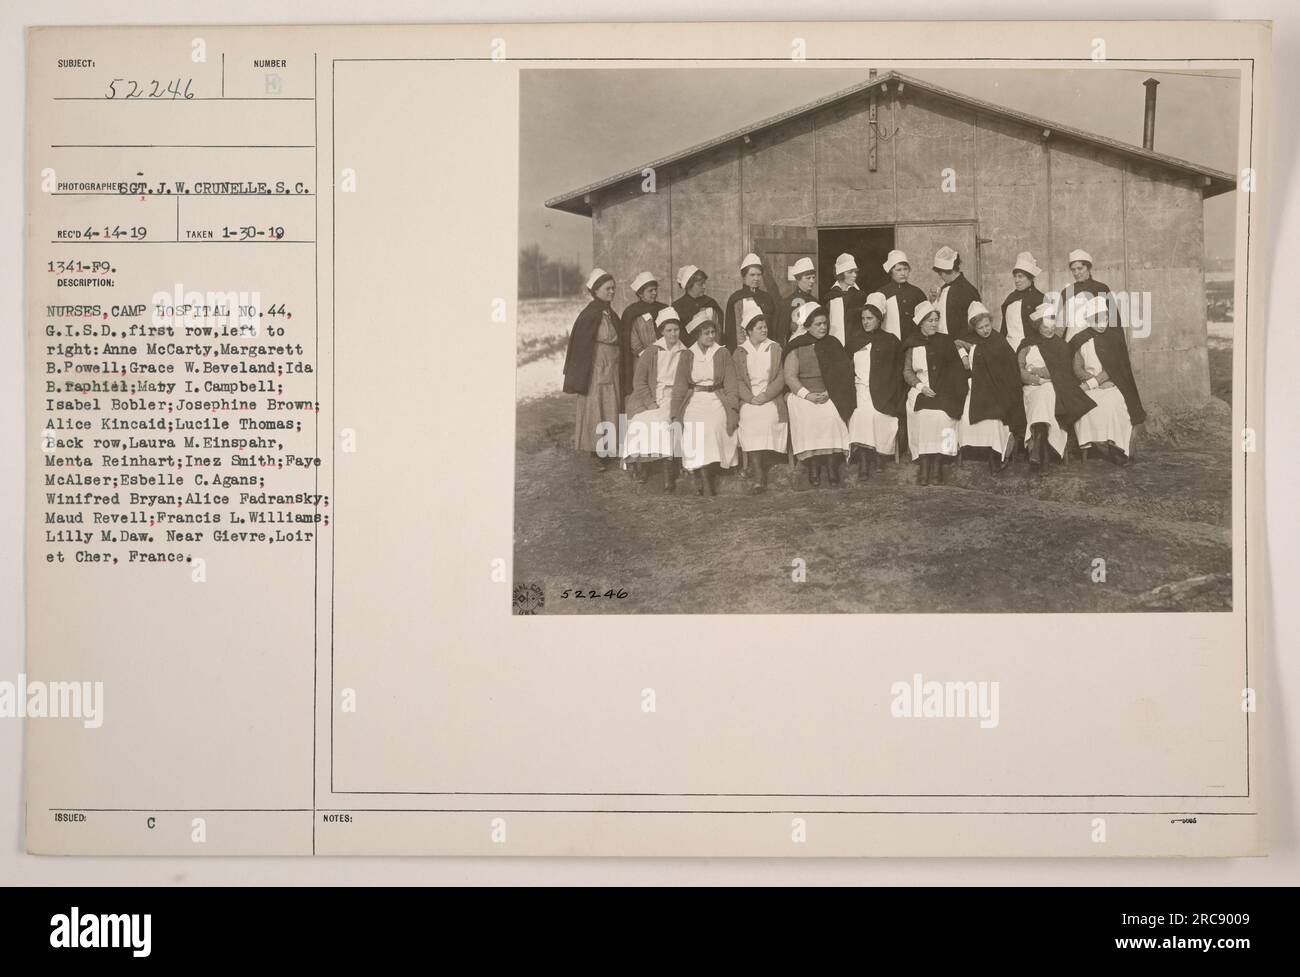 'Nurses from Camp Hospital No. 44, G.I.S.D. near Gievre, Loire et Cher, France. The photo, taken on January 30, 1919, captioned with the names of the individuals. The first row shows (left to right): Anne McCarty, Margarett B. Powell, Grace W. Beveland, Ida B. Faphiel, Maty I. Campbell, Isabel Bobler, Josephine Brown, Alice Kincaid, Lucile Thomas. The back row showcases Laura M. Einspahr, Menta Reinhart, Ines Smith, Paye McAlser, Esbelle C. Agans, Winifred Bryan, Alice Fadransky, Maud Revell, Francis L. Williams, and Lilly M. Daw.' Stock Photo